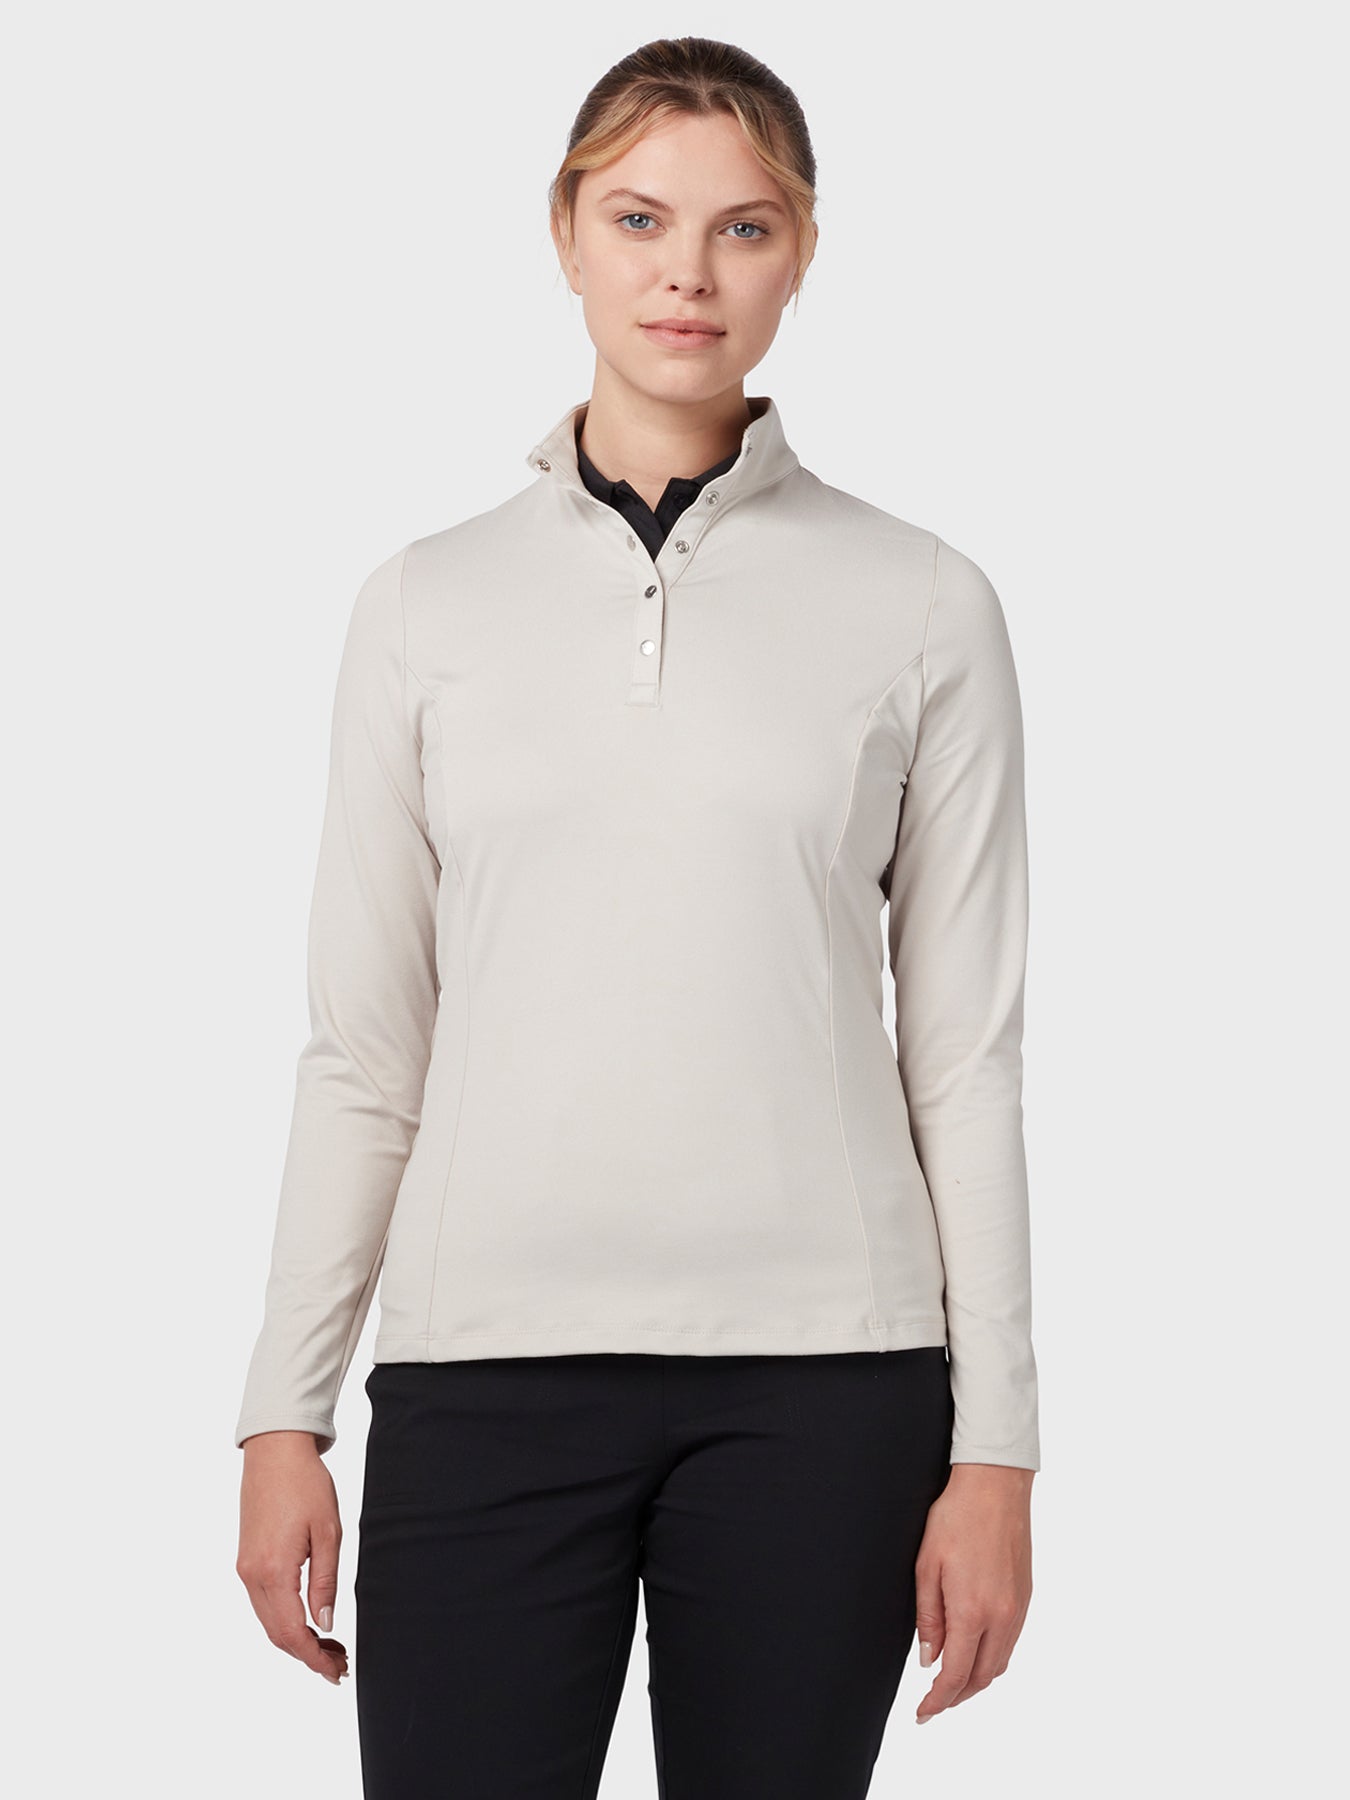 View Womens Thermal Longsleeve Fleece Back Jersey Polo In Chateau Grey Chateau Grey XXL information